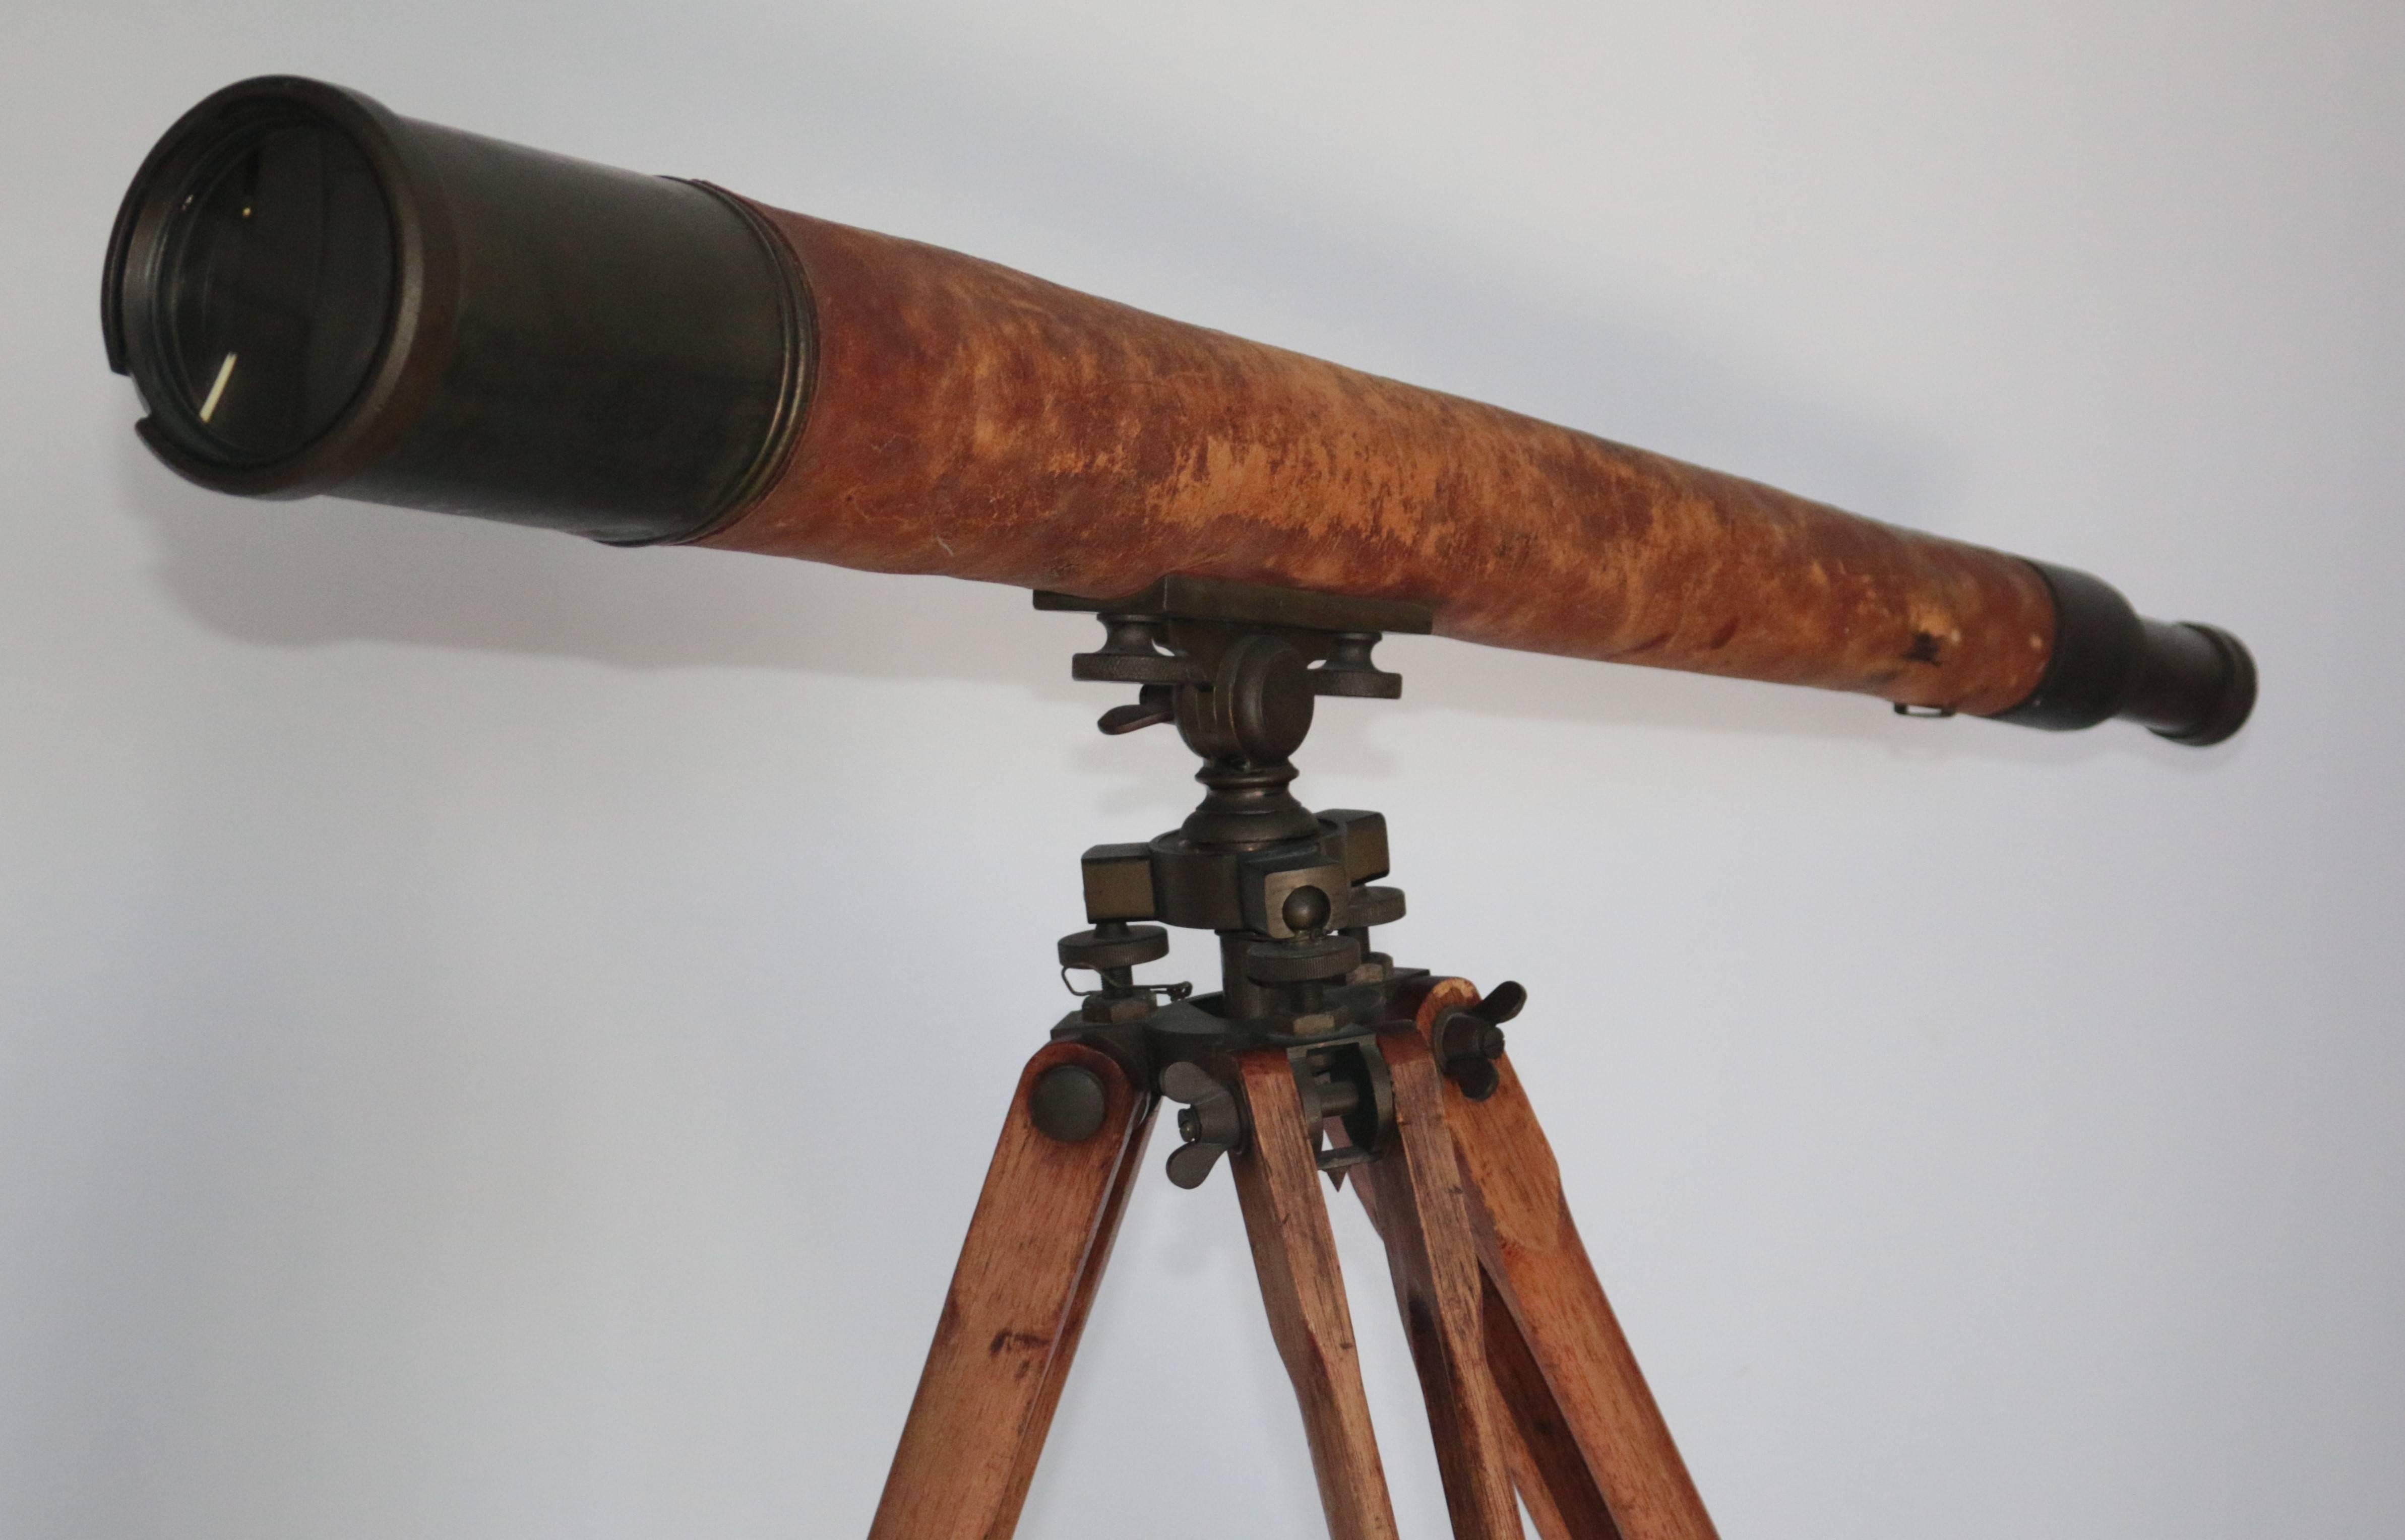 This decorative telescope stands on a height adjustable base which was designed to be used outside because of the spiked feet. The Scope itself is brass with a stiched leather covering to the centre section and bears stamped markings.

Height will